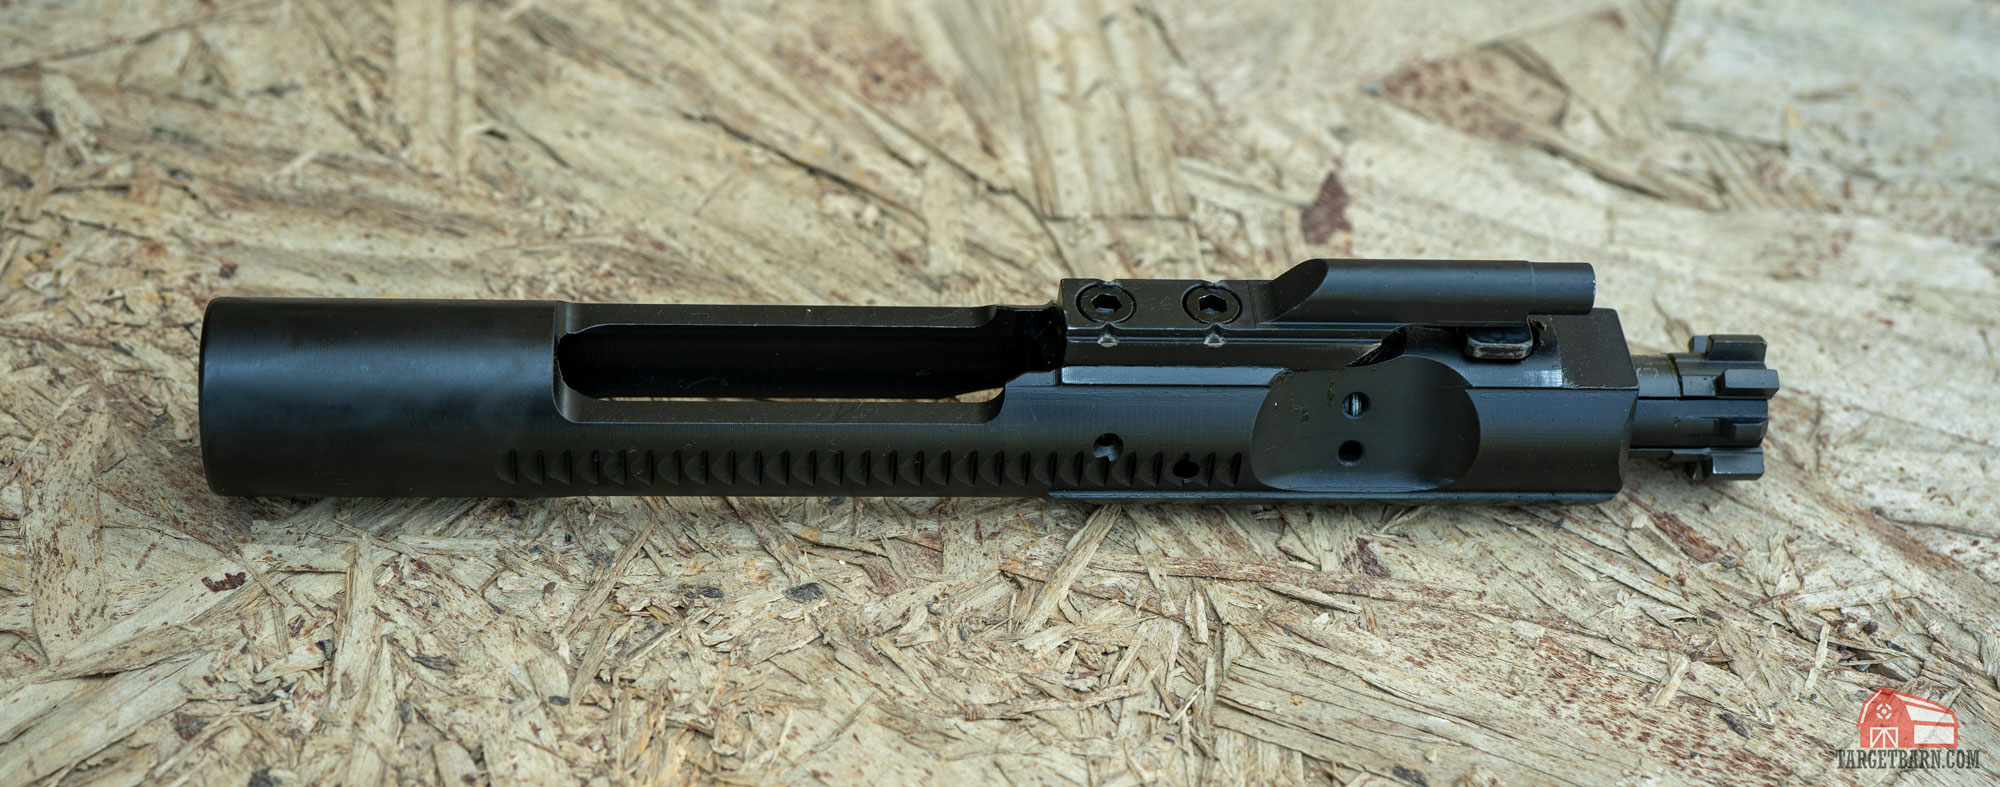 an ar15 bolt carrier group in a direct impingement rifle may foul quicker than a gas piston rifle